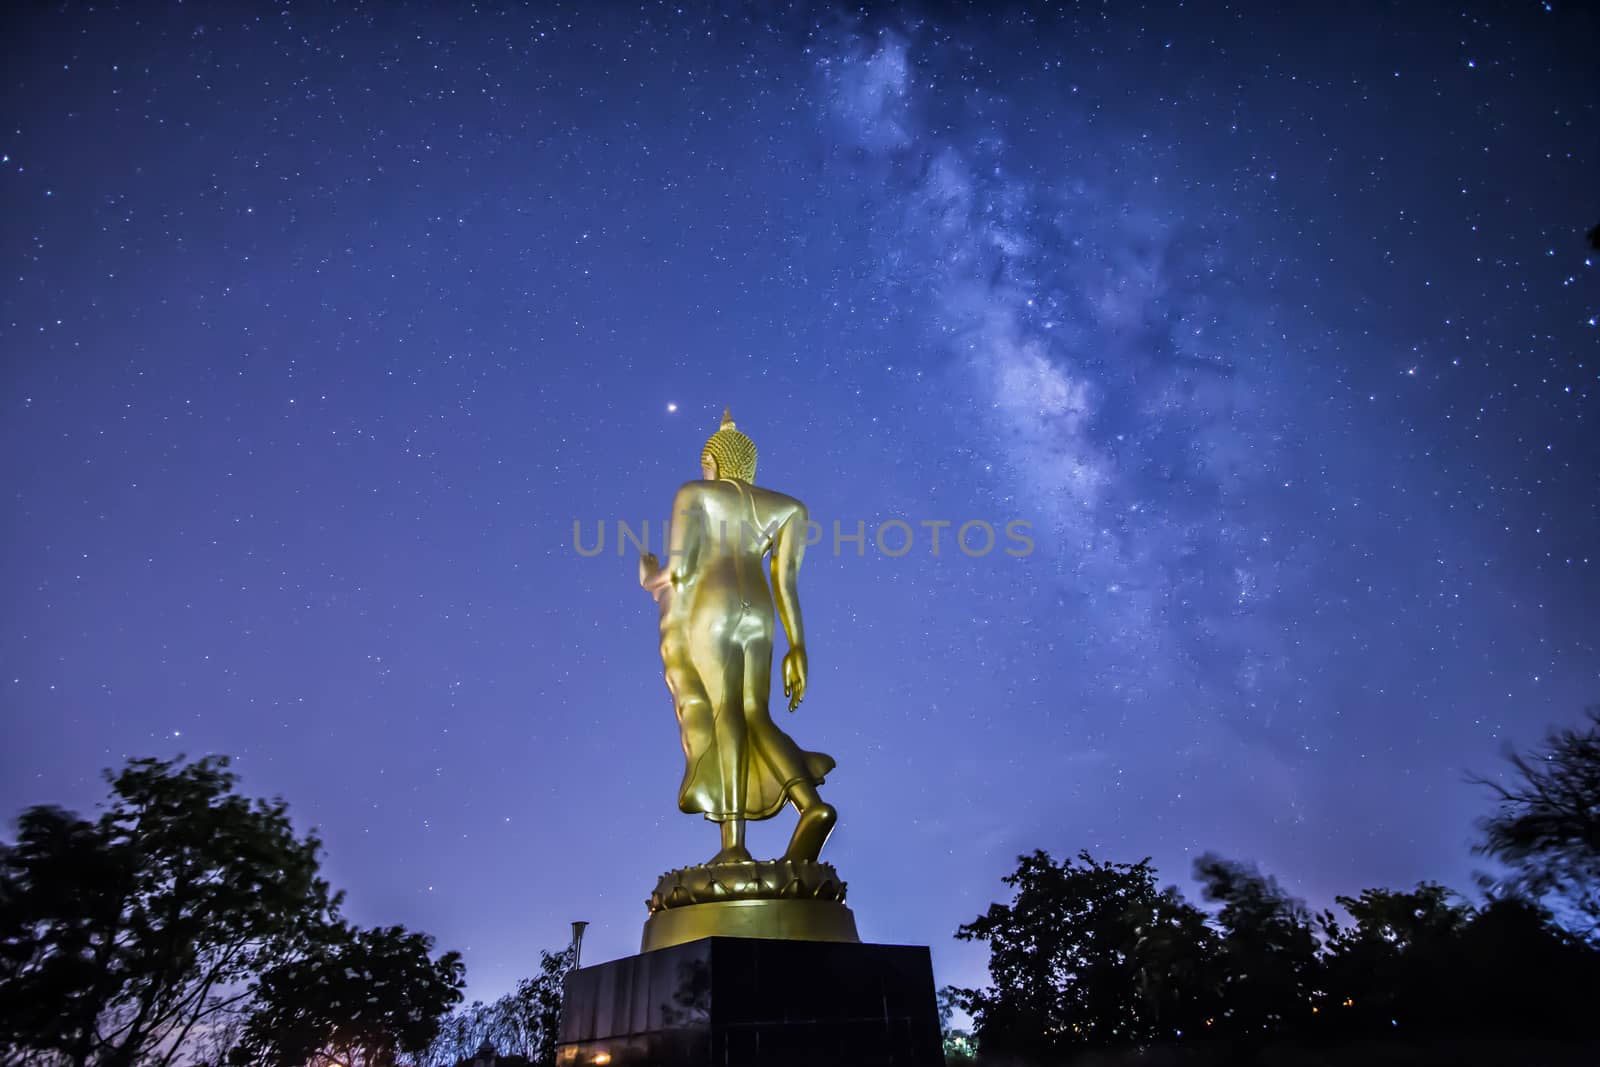 Buddha statue on the milky way background in Thailand by Gobba17